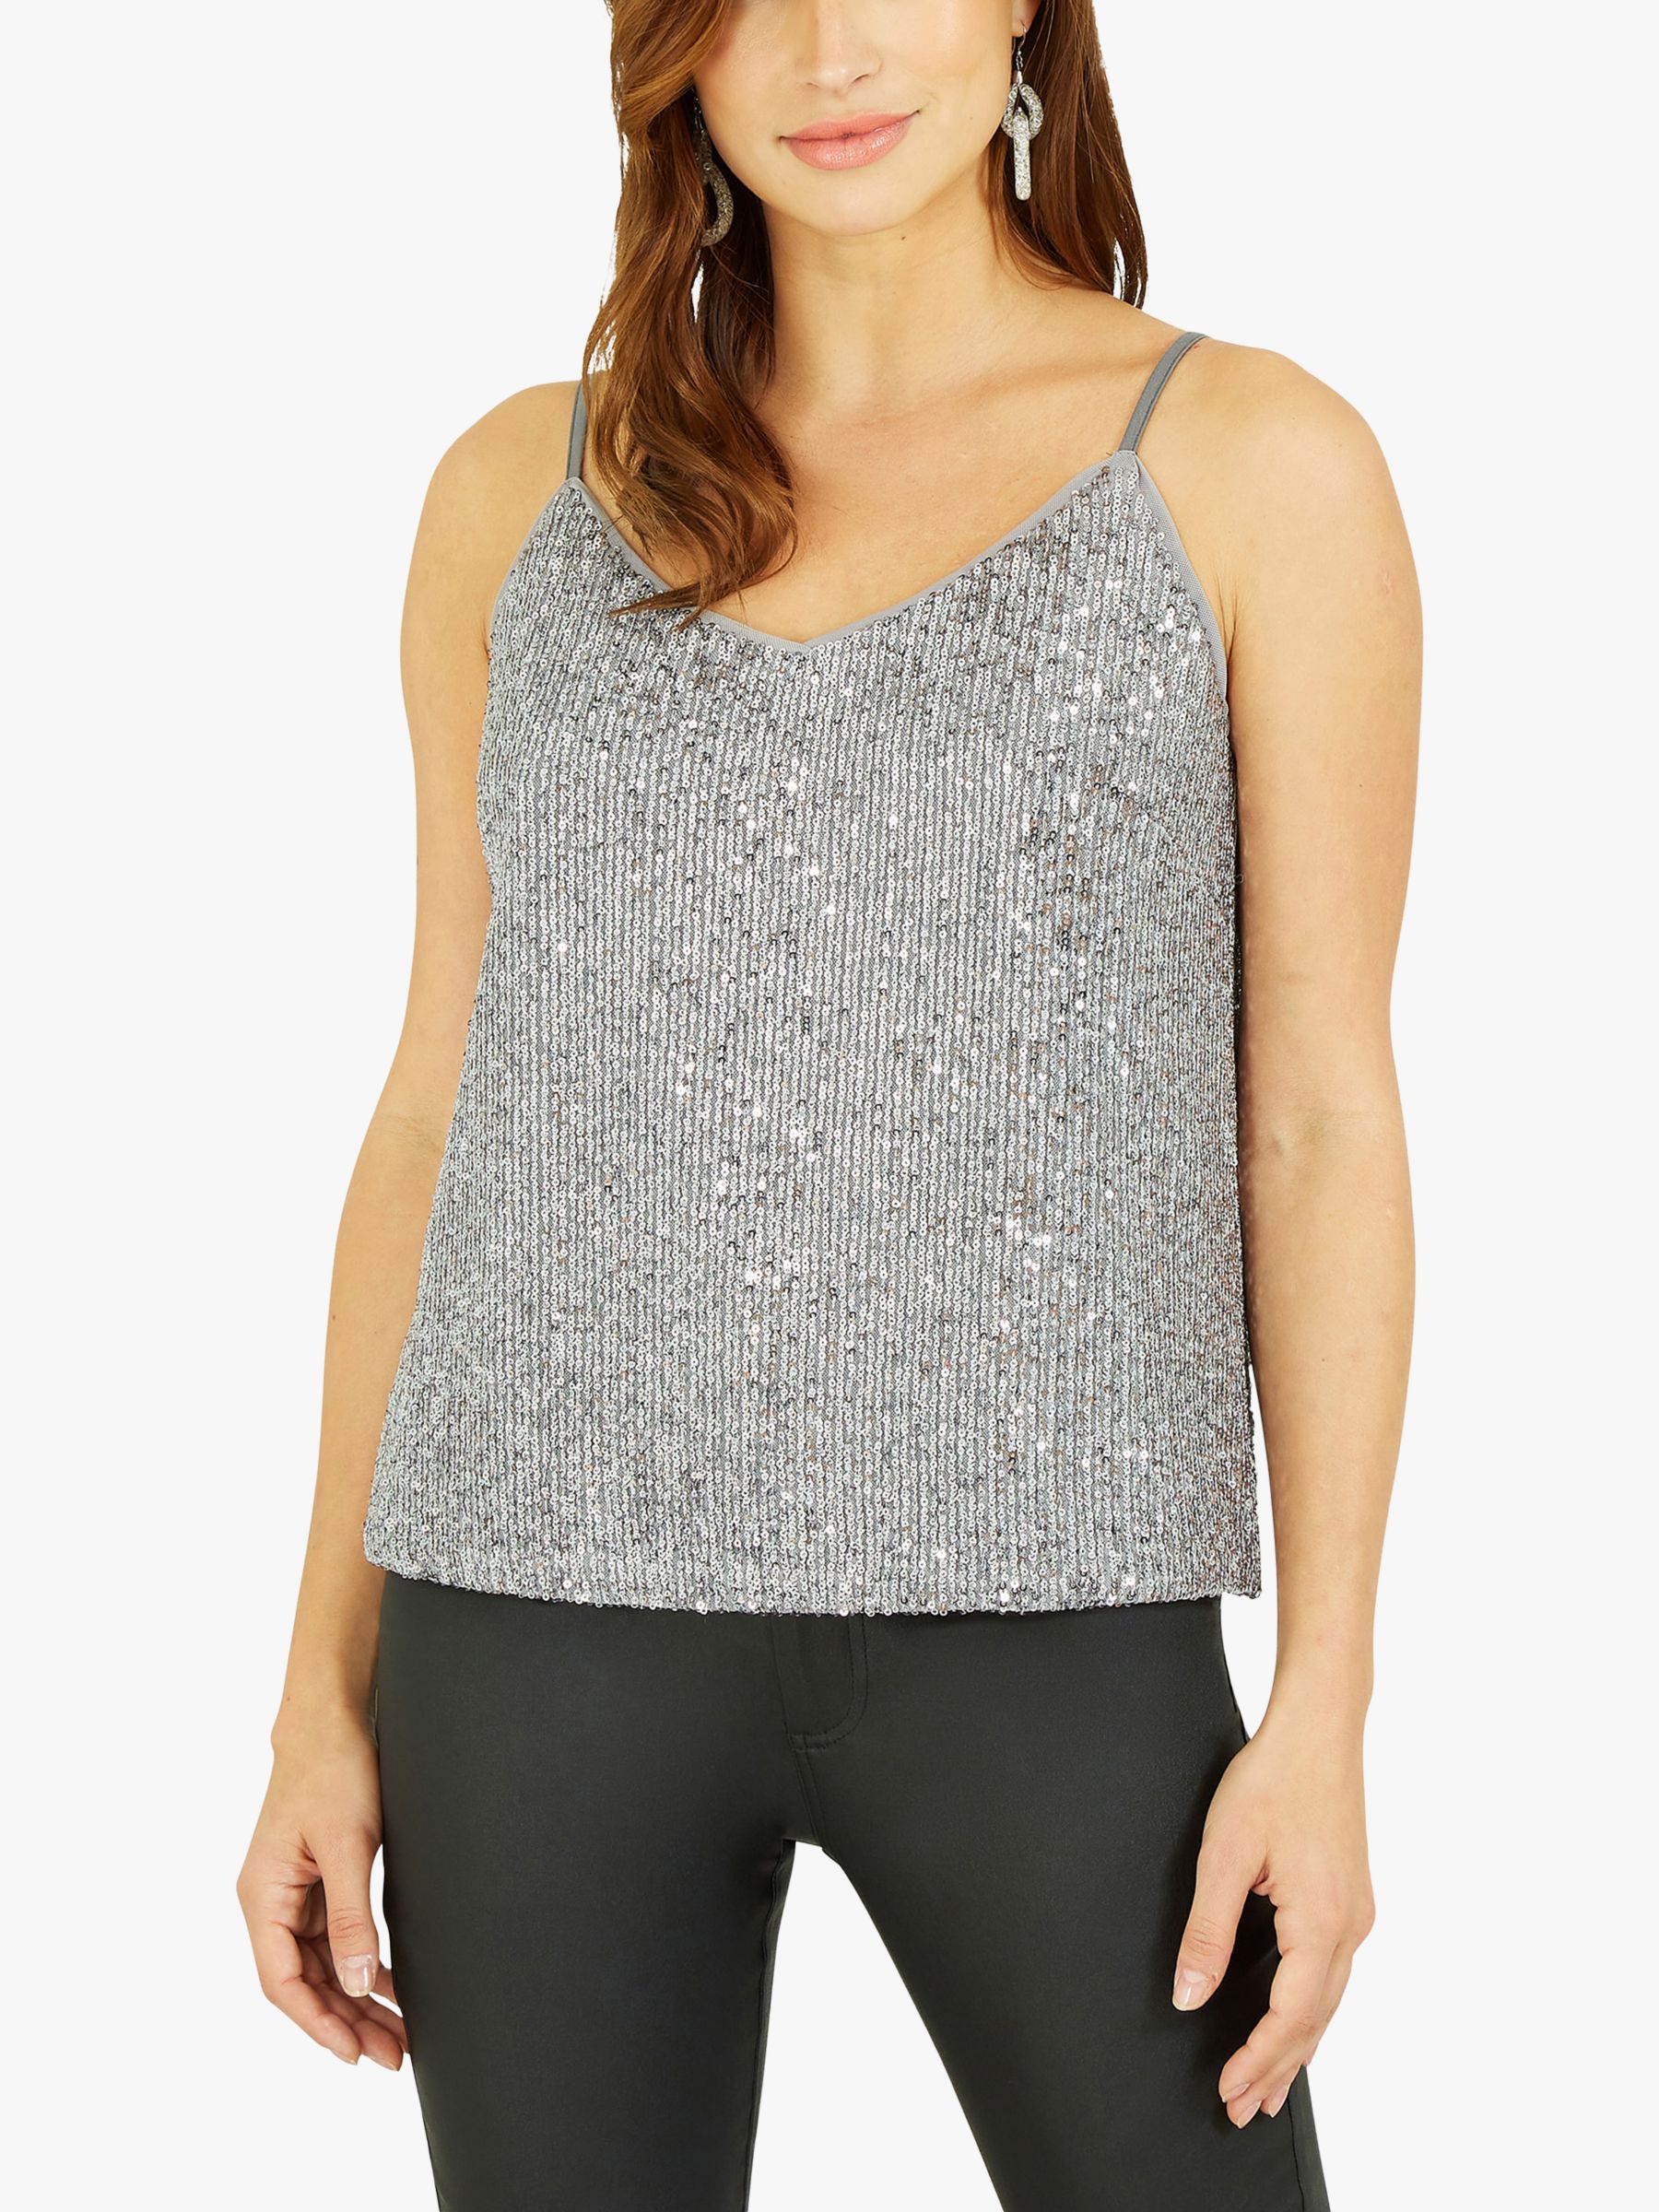 Silver Embellished Sequin Cami Top